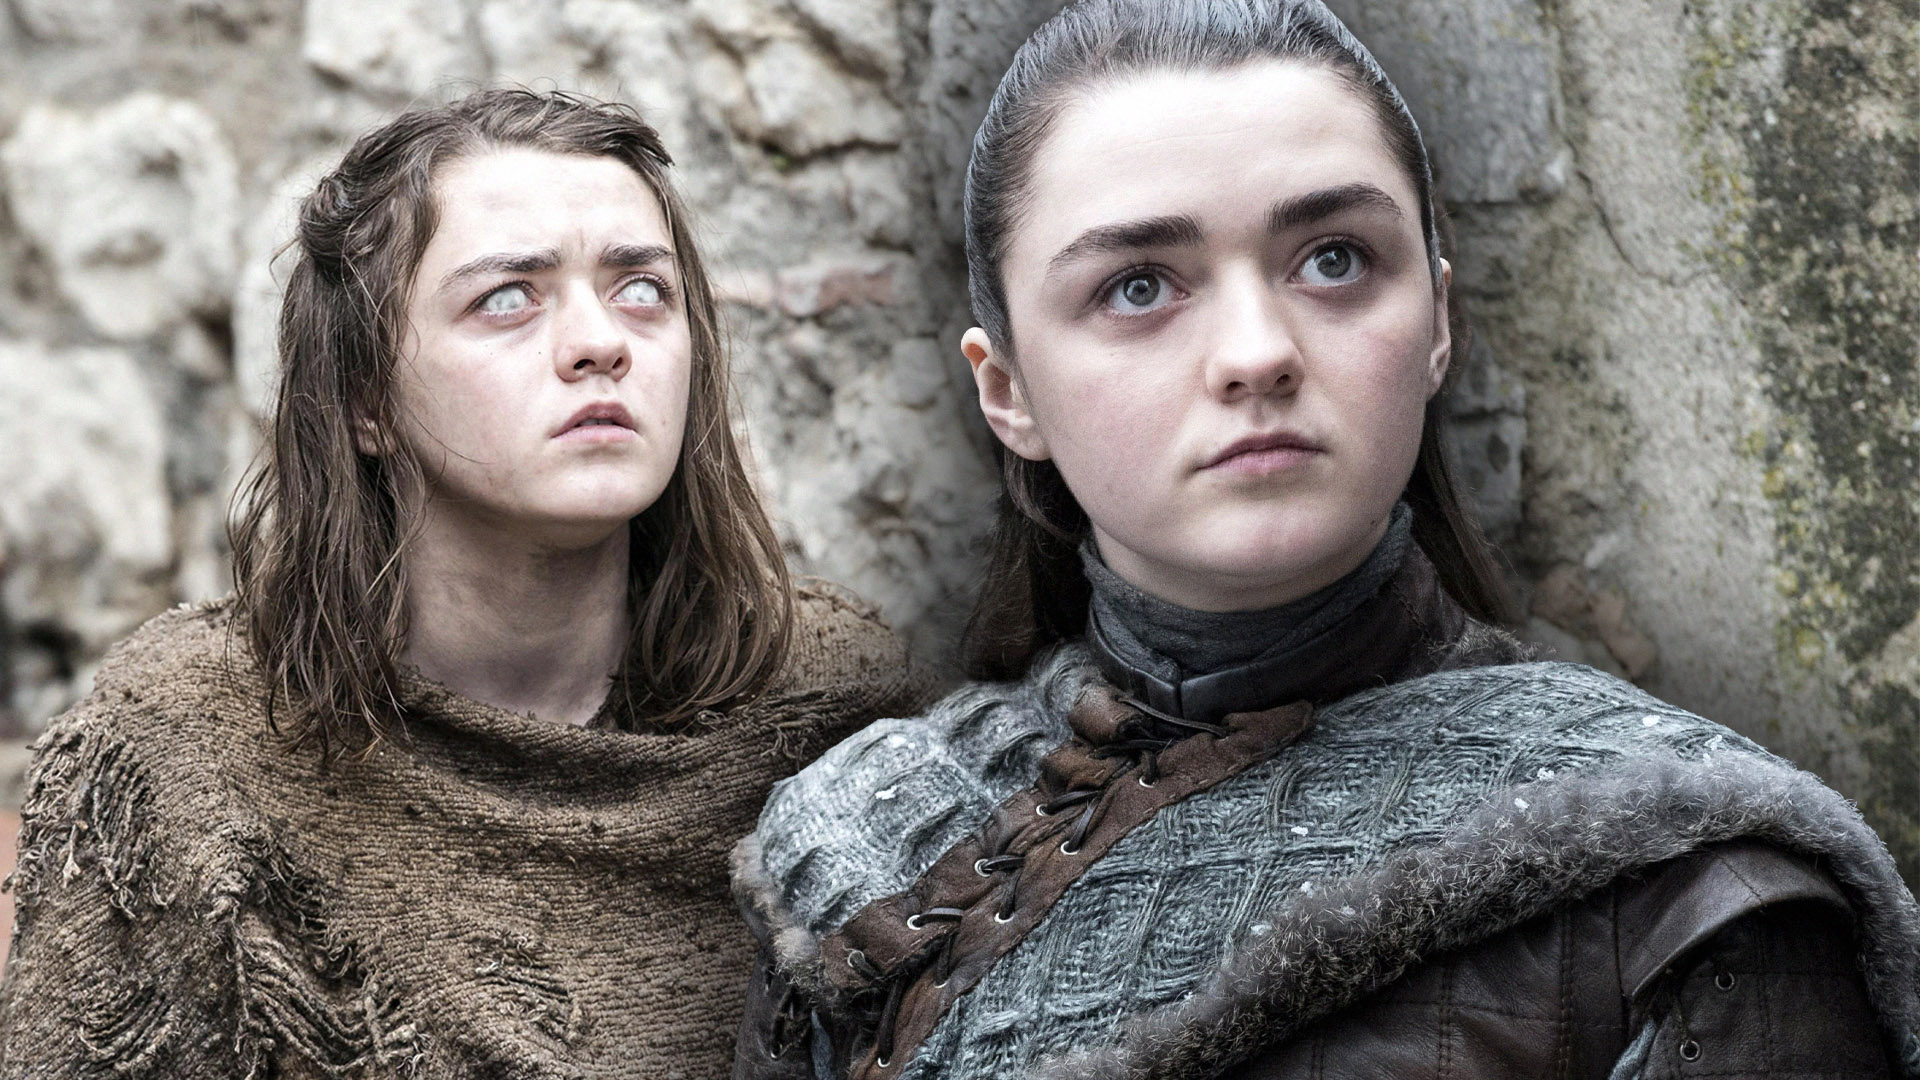 The Dangers of Being a Child Actor: How Game of Thrones Almost Ruined Maisie Williams' Life